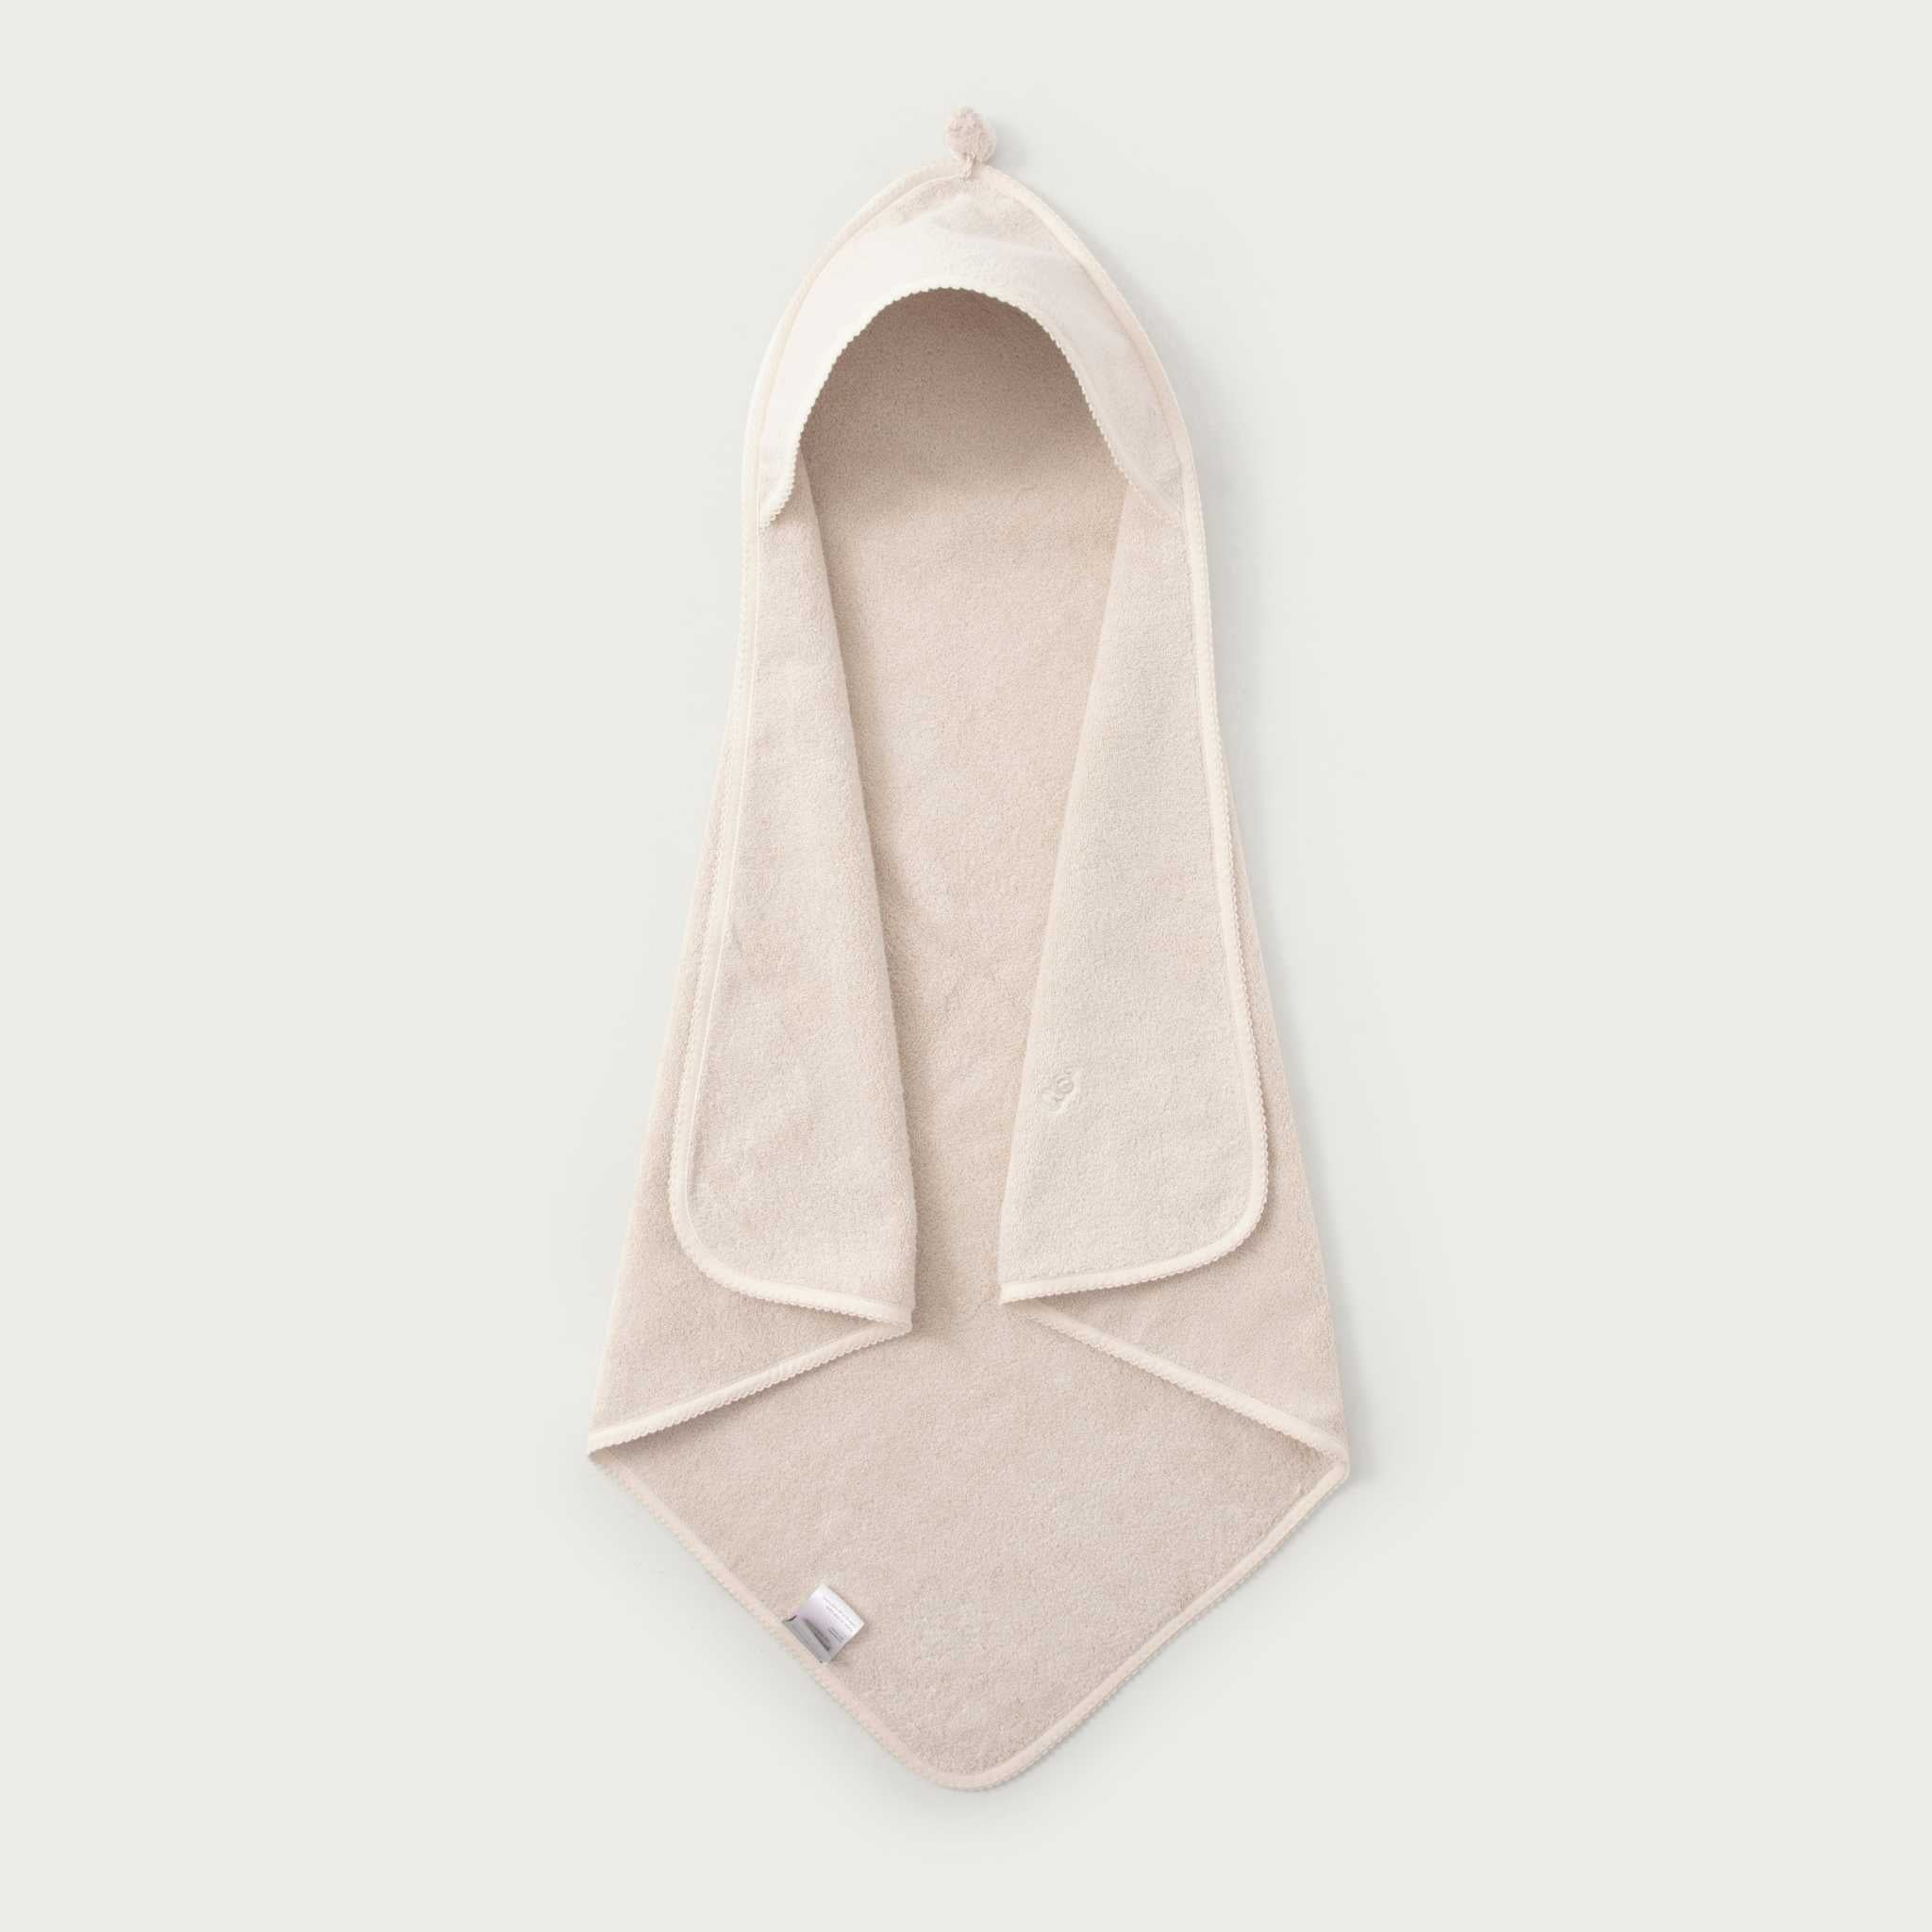 Garbo & Friends Hooded Towel - Sand - On Grey Background